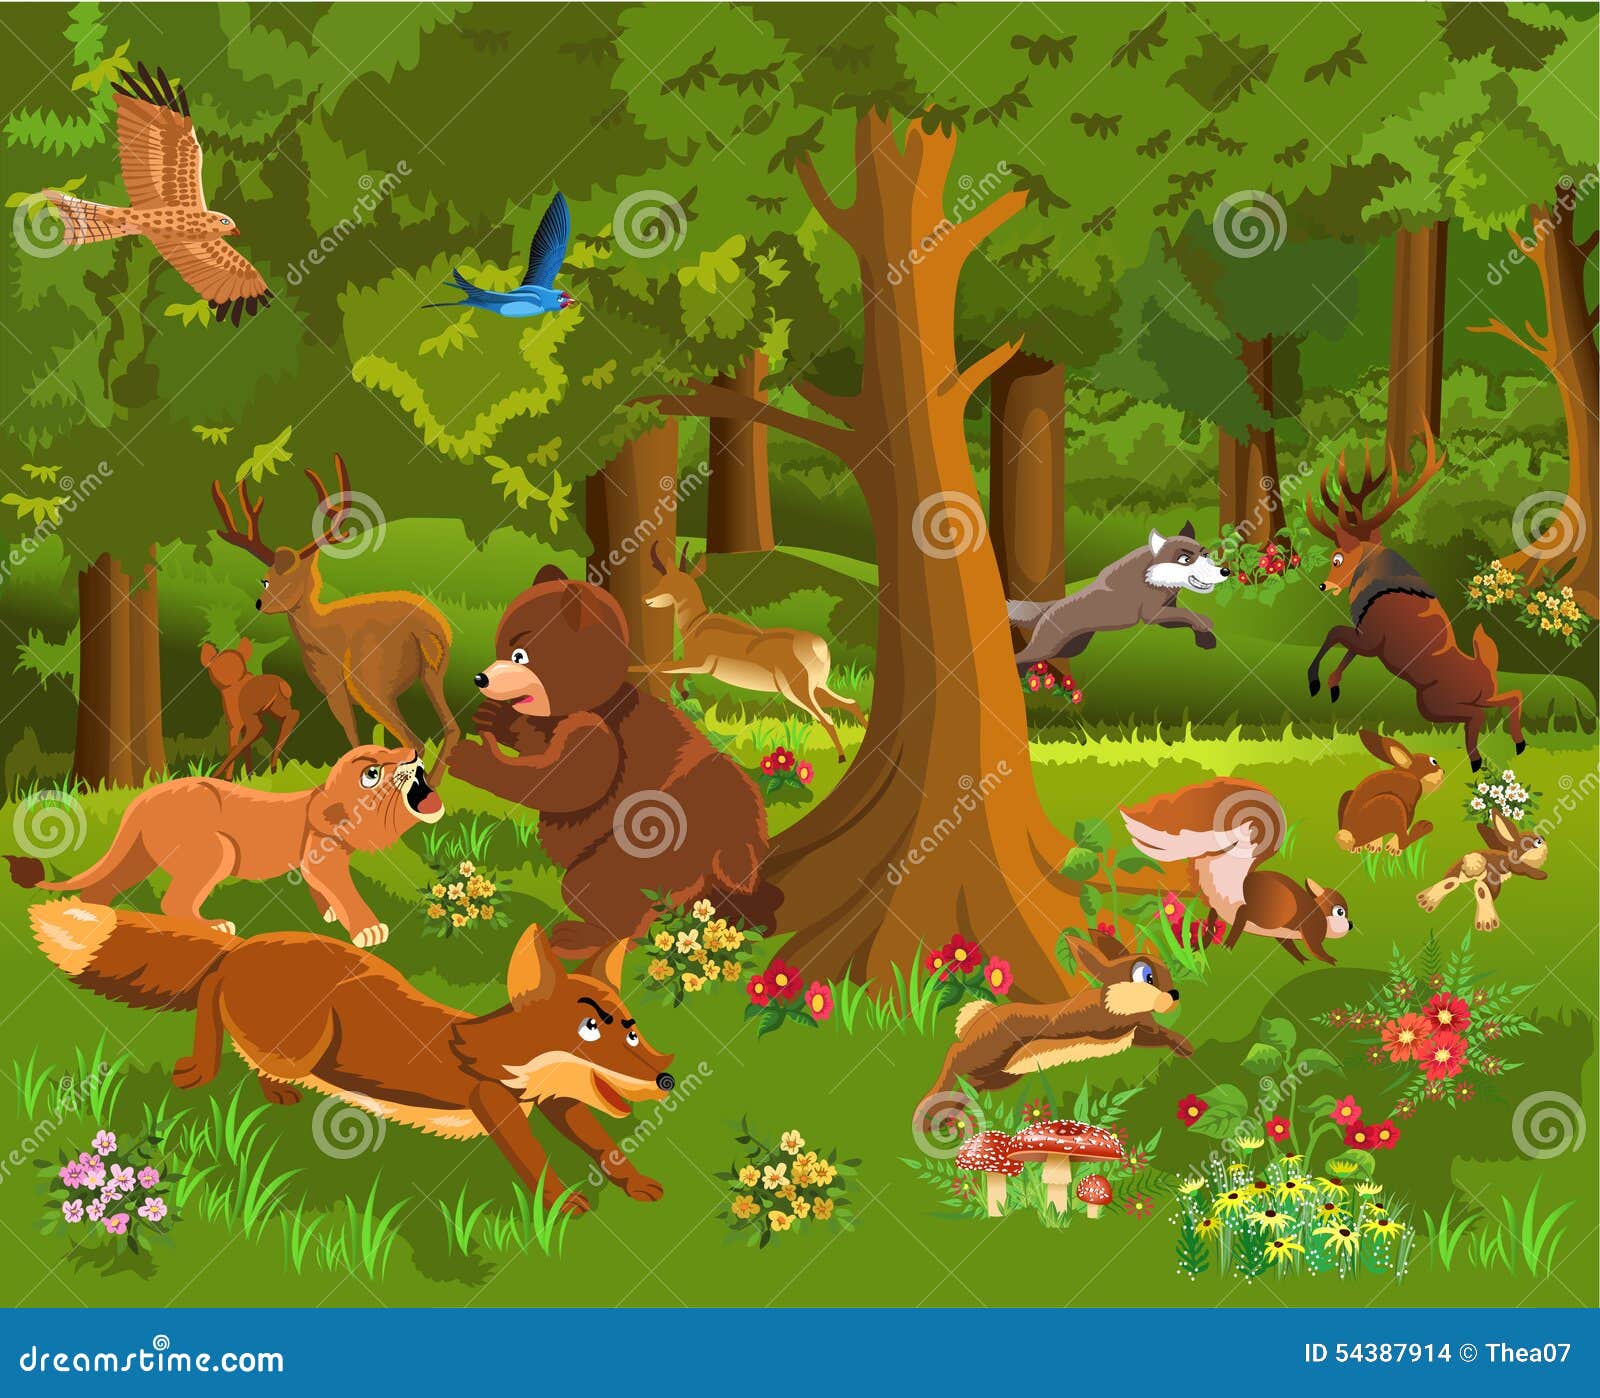 Wild Animals Fighting in the Forest Stock Vector - Illustration of plants,  fairy: 54387914